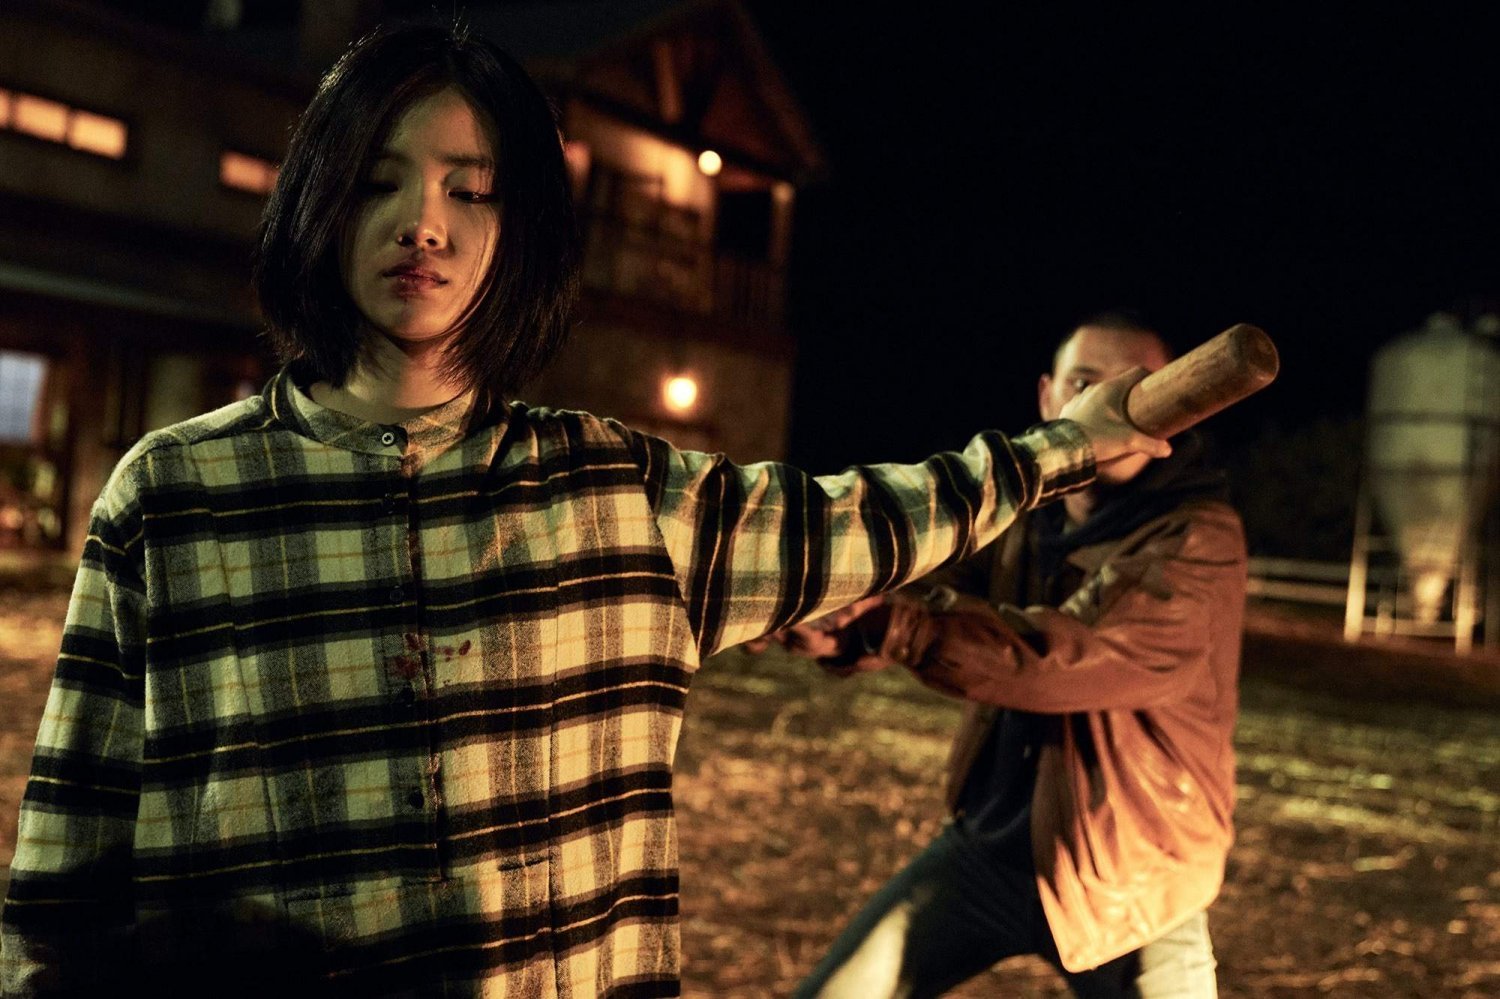 [Photos] New Stills Added for the Korean Movie 'The Witch